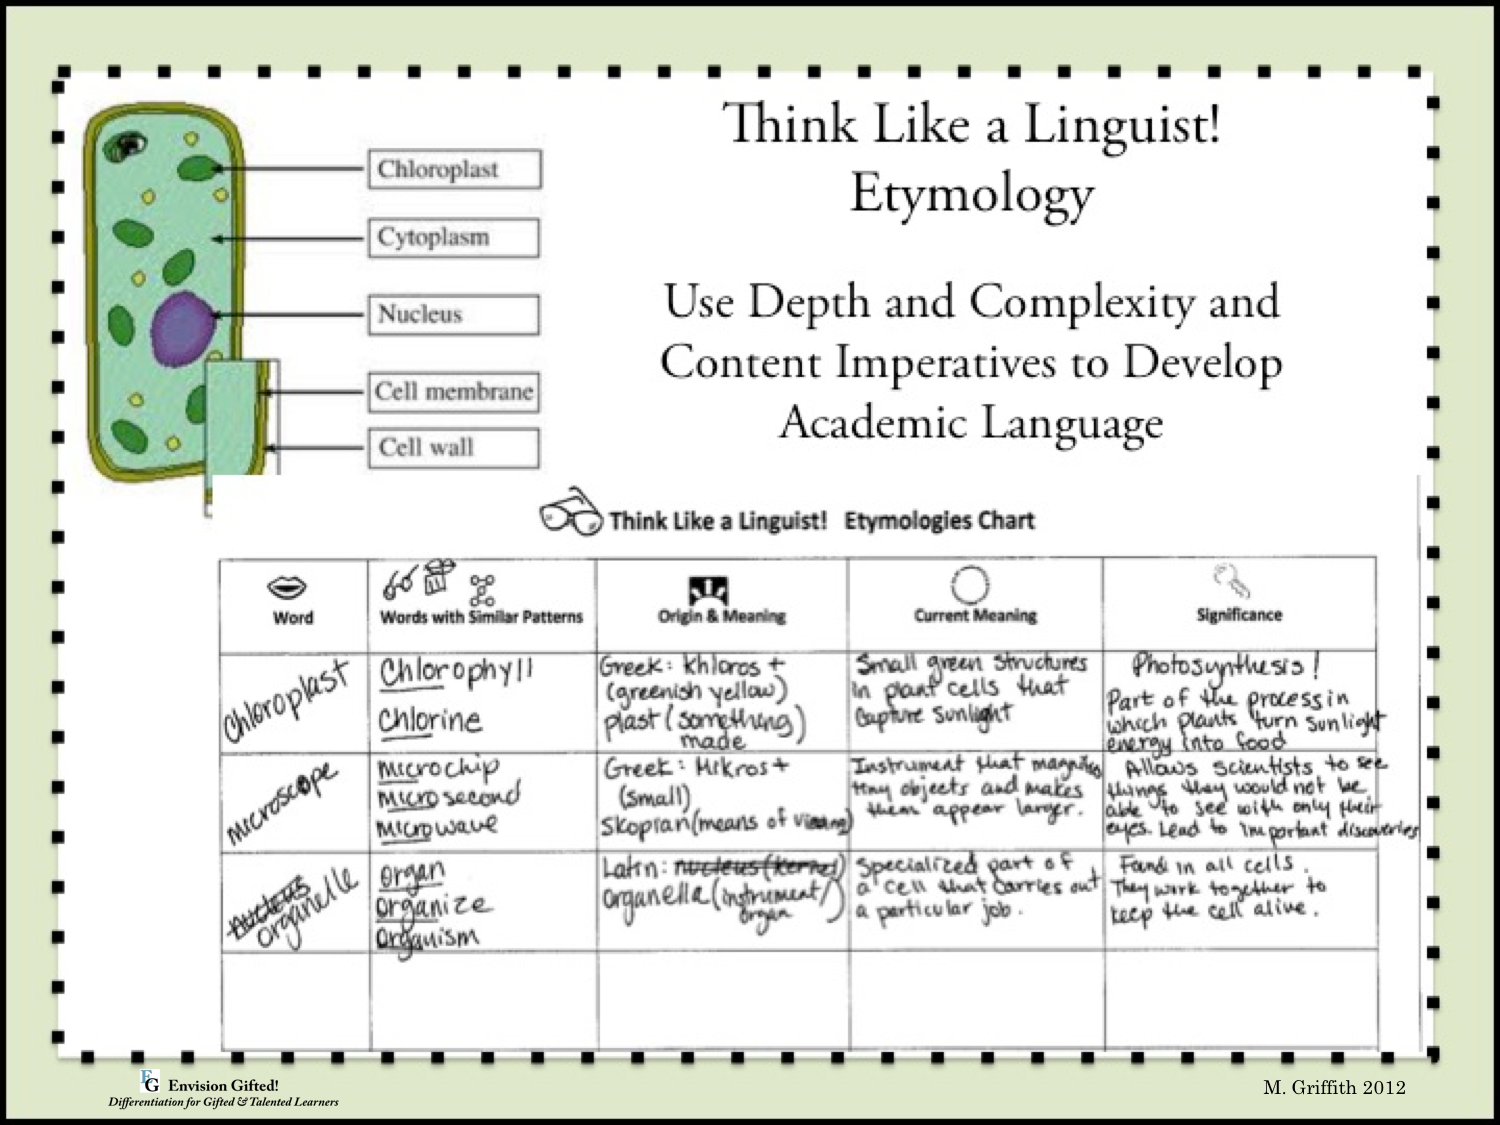 Envision Gifted. hink LIke a Linguist Etymology